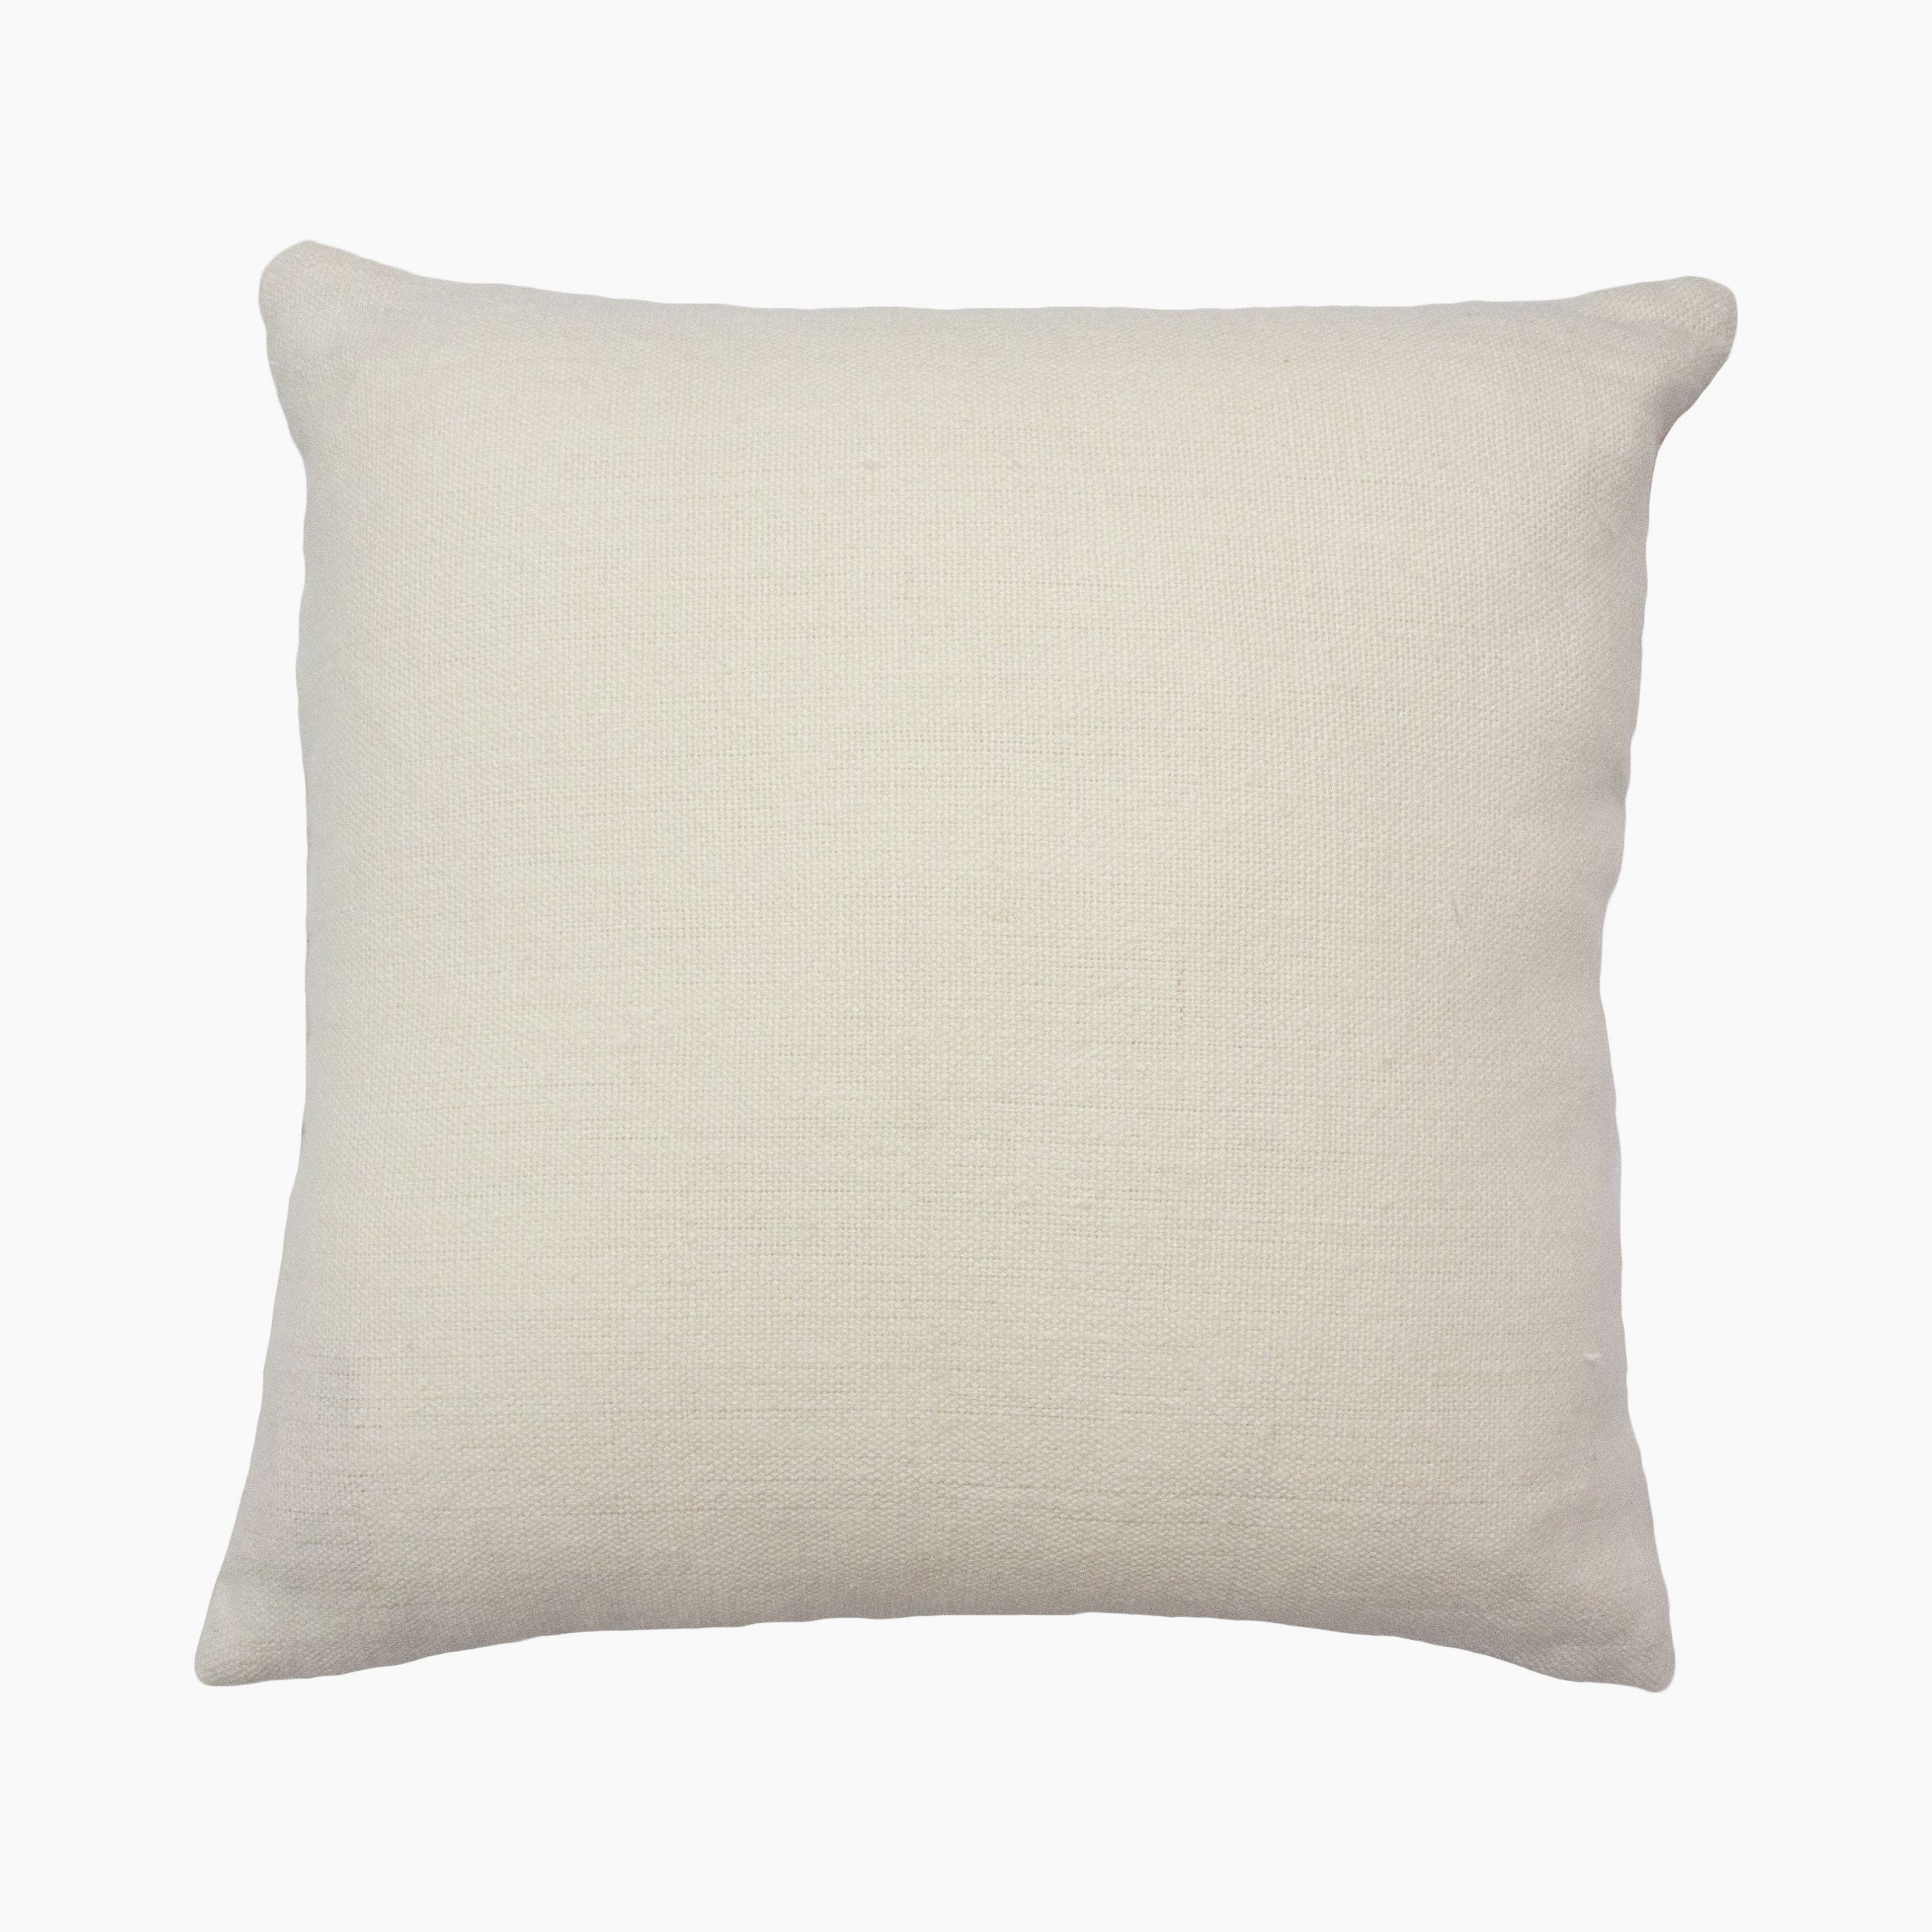 Marianne Square Pillow - Blue